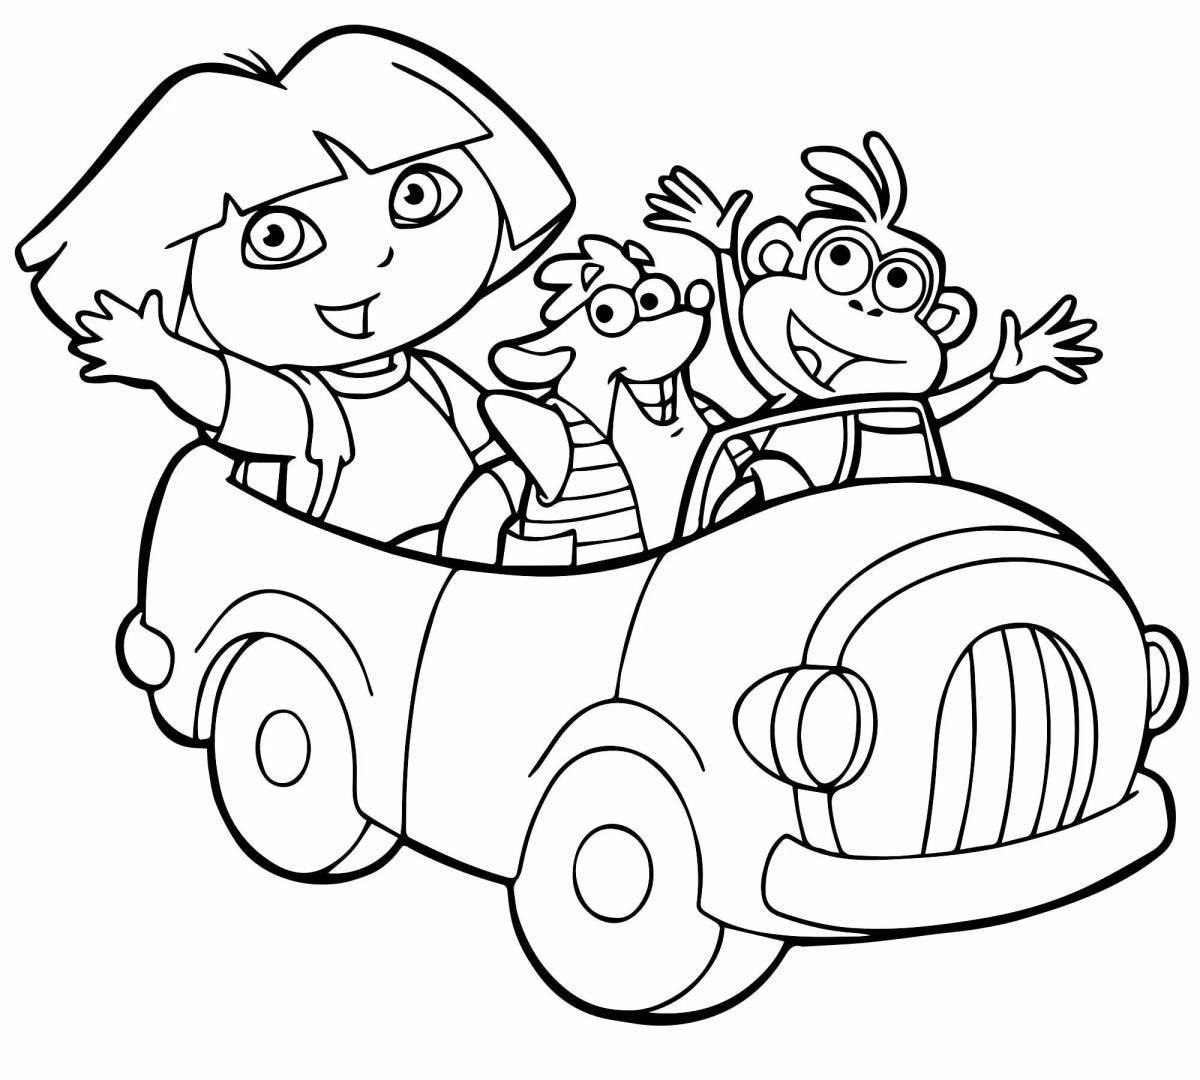 A fun cartoon coloring book for 4-5 year olds